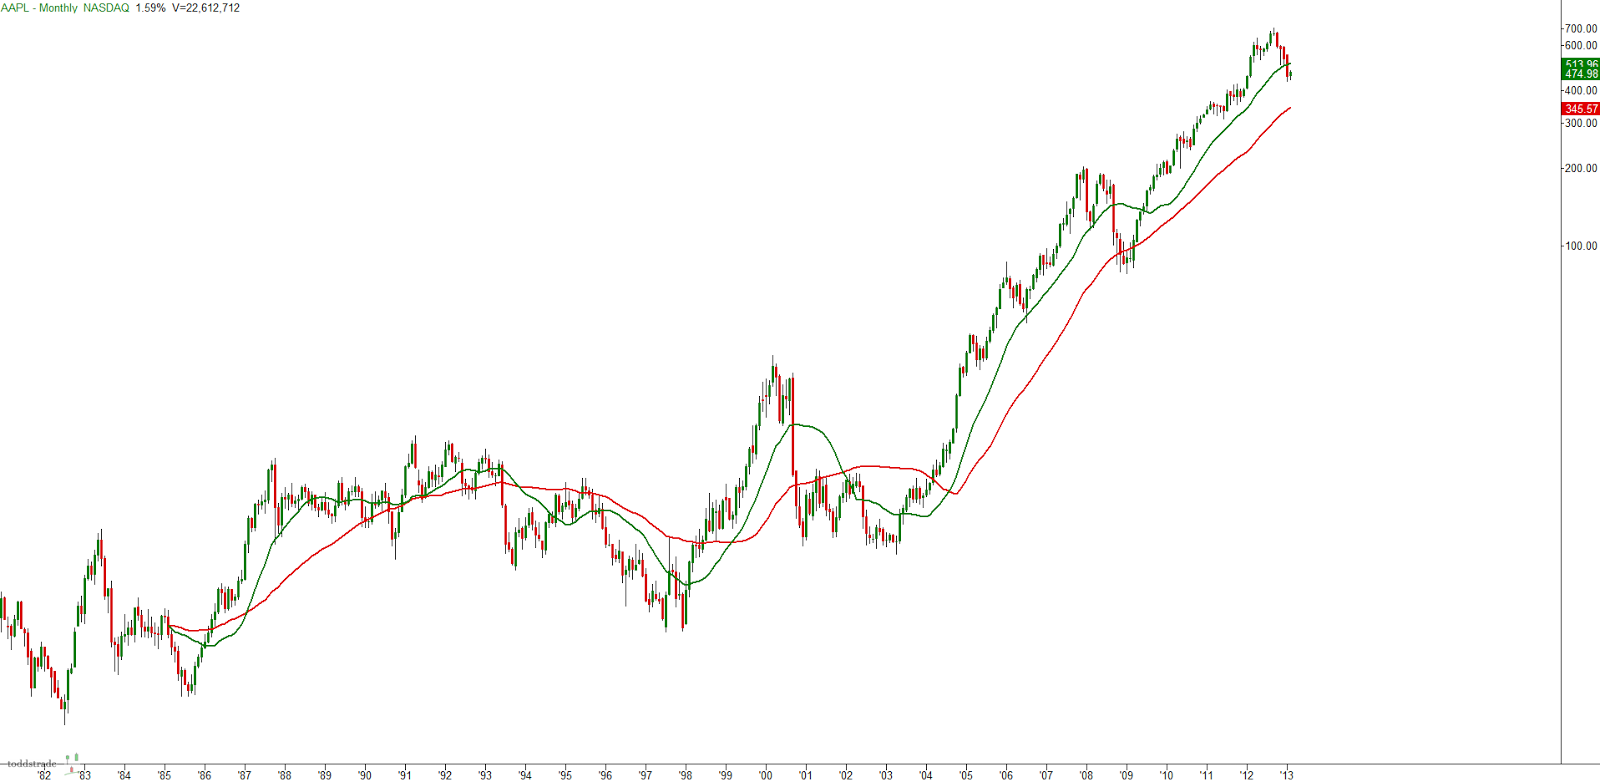 AAPL - Monthly